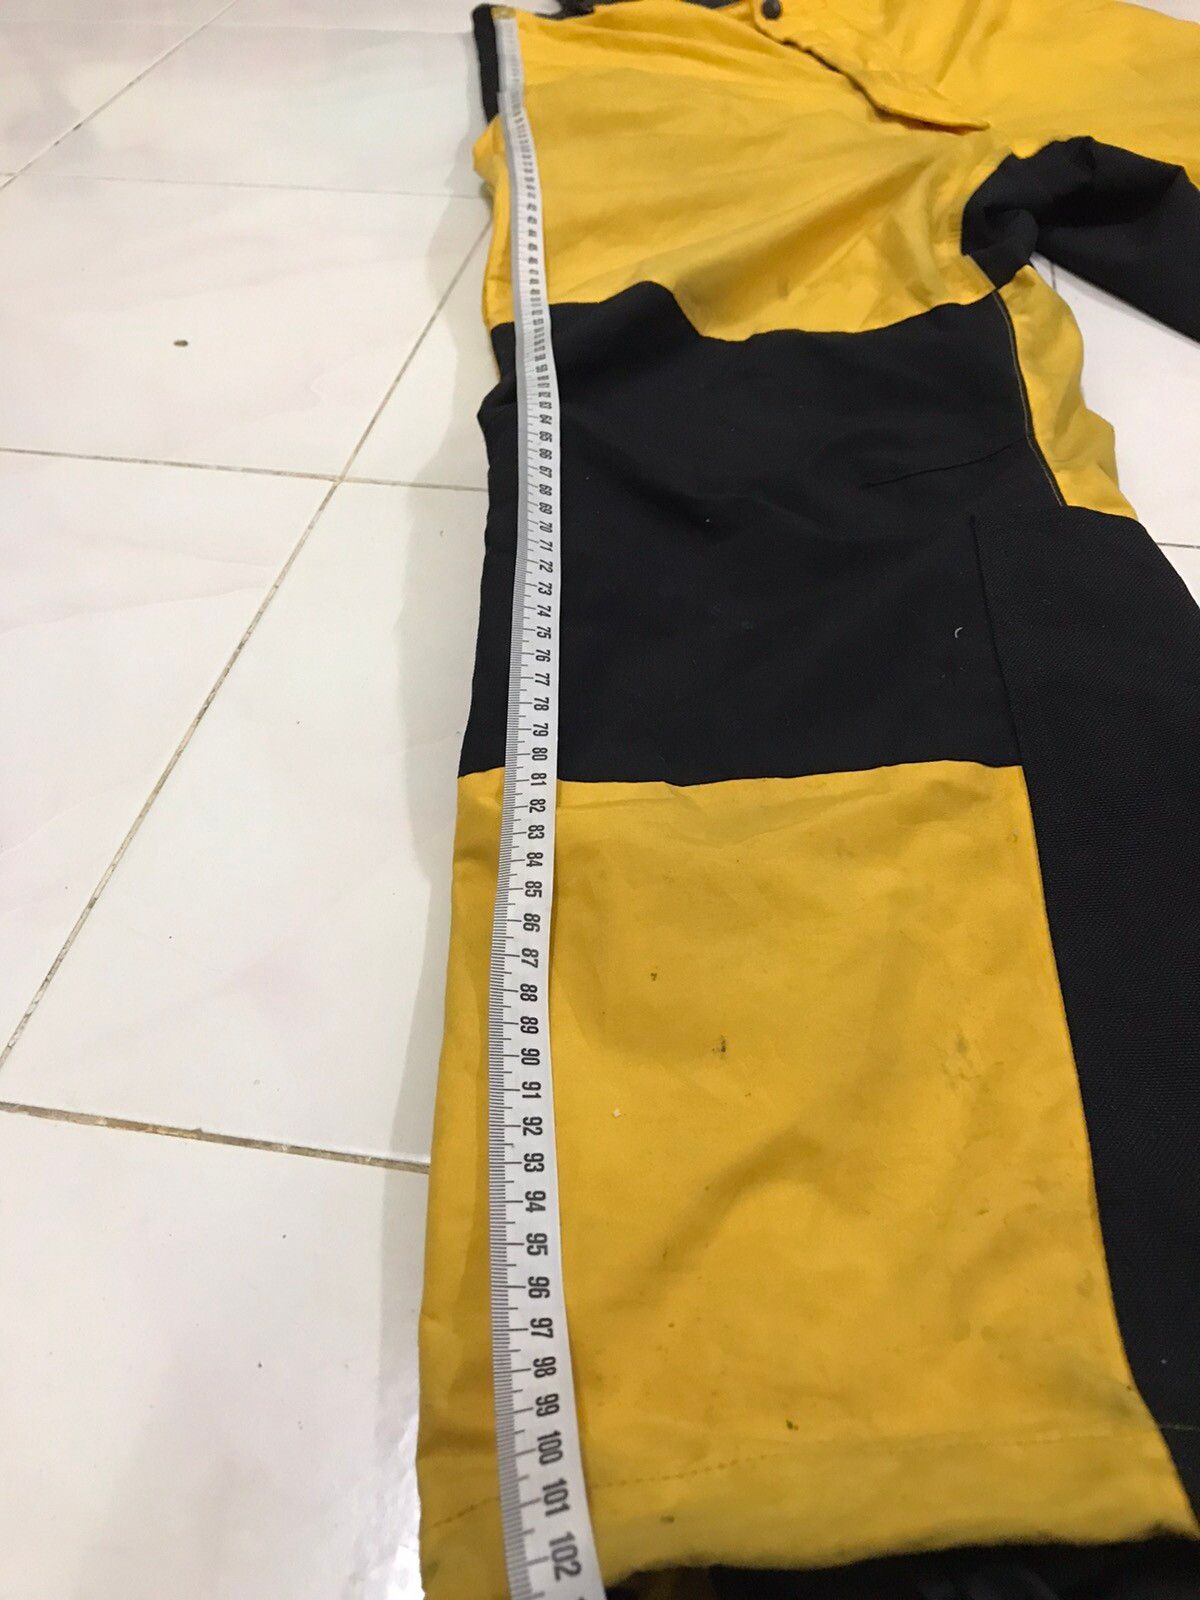 THE NORTH FACE” GORE-TEX SKI PANTS BIBS OVERALLS IN YELLOW - 10